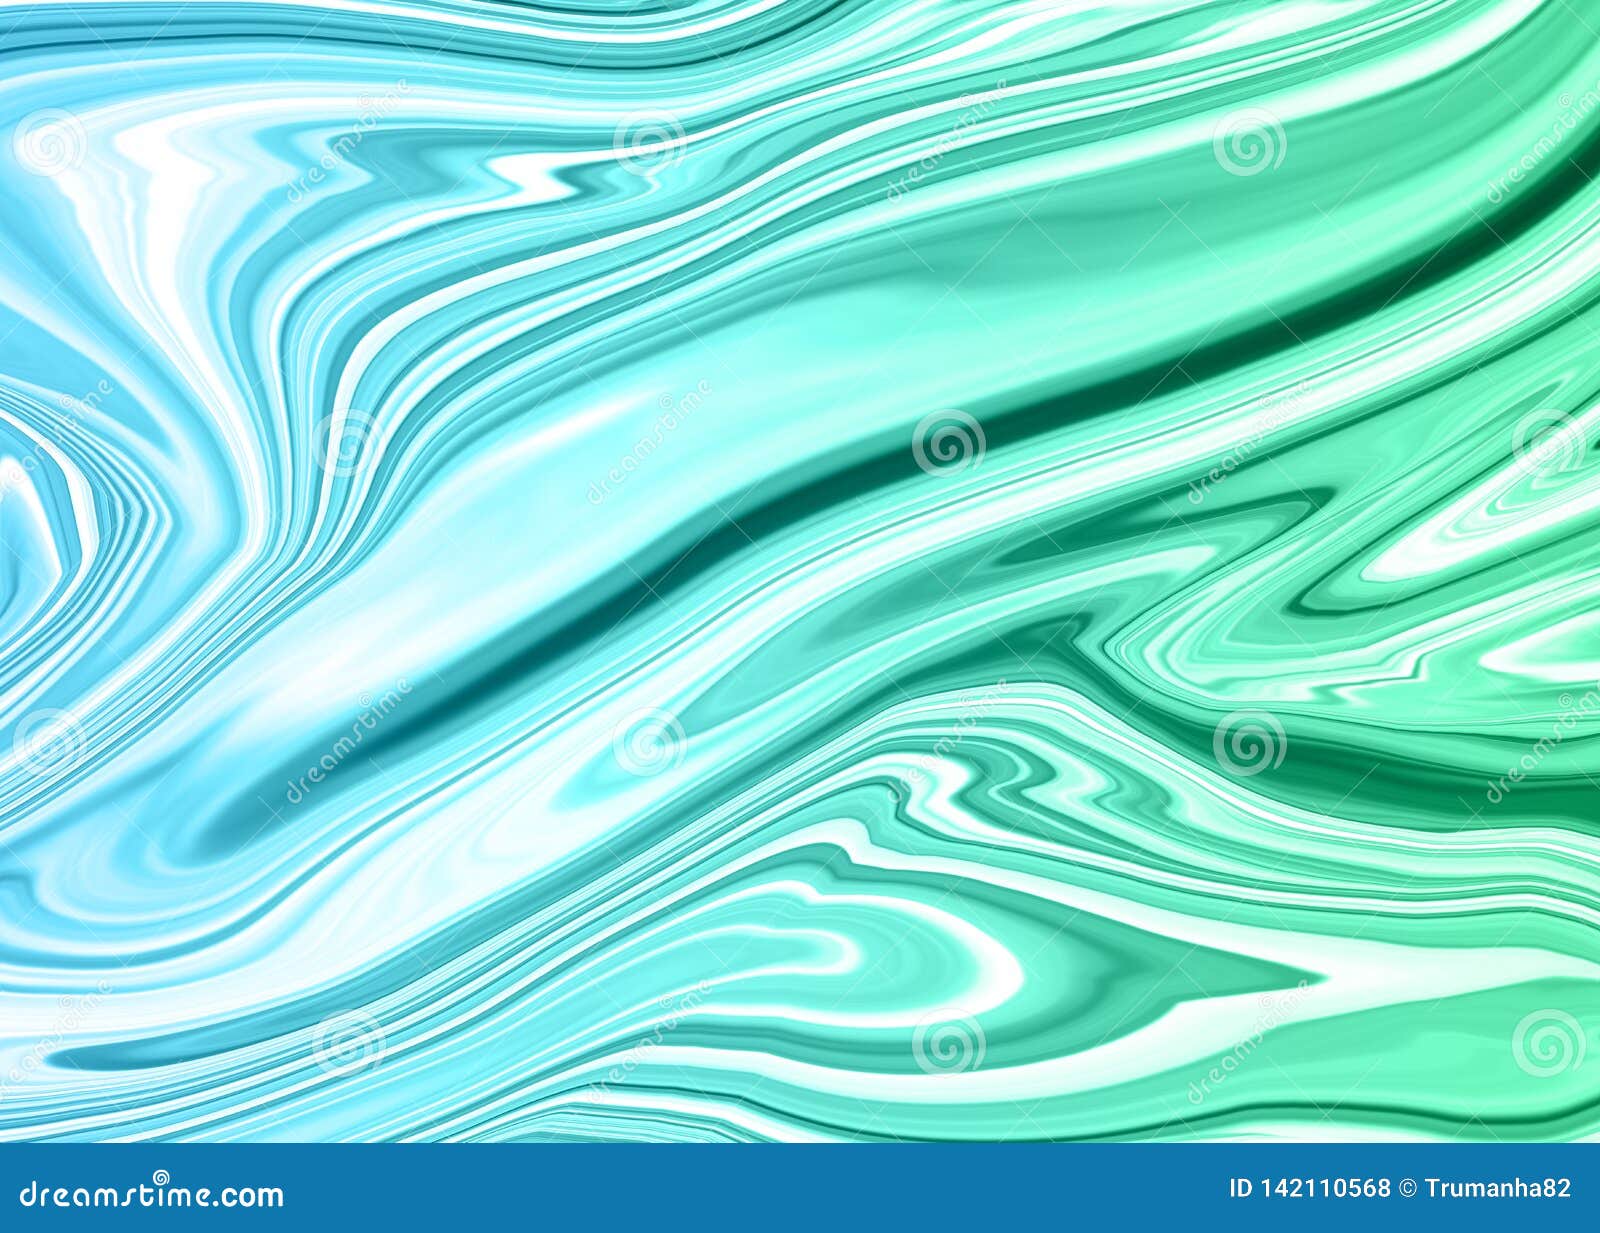 Abstract Blue And Green Marble Texture For Background Stock Illustration Illustration of